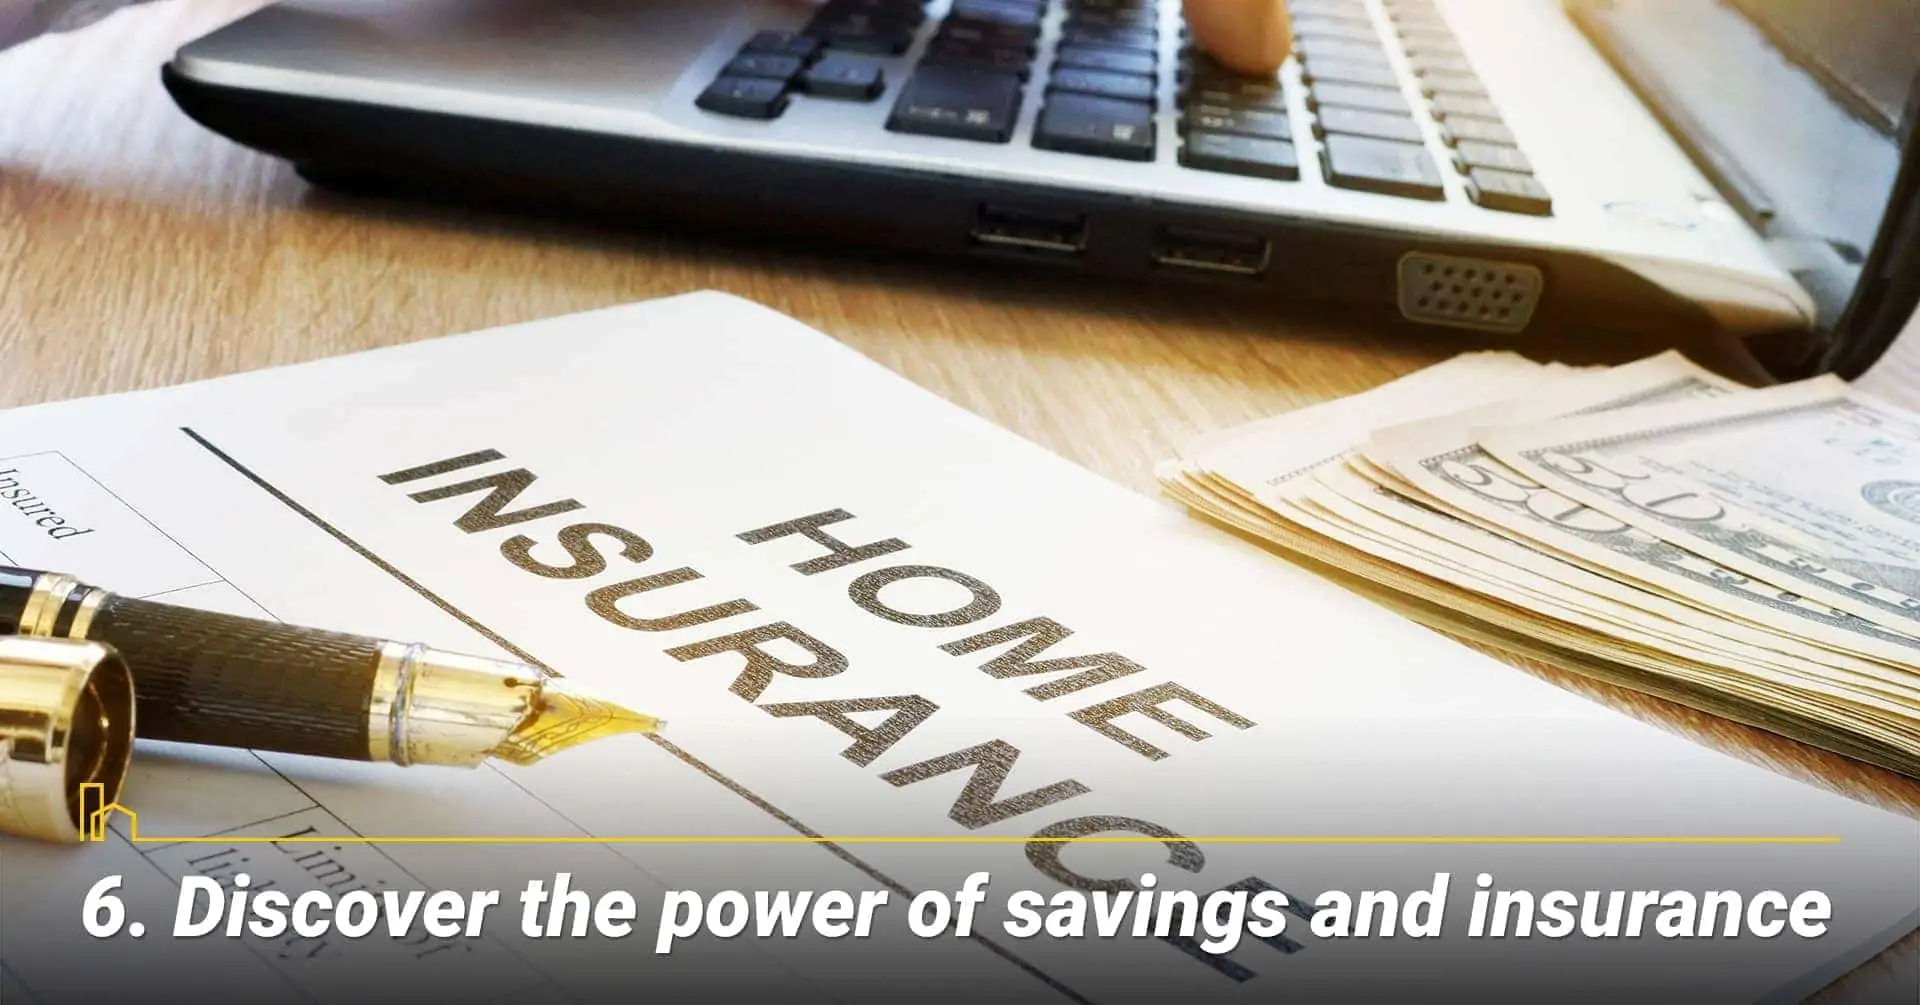 Discover the power of savings and insurance, the importance of savings and insurance